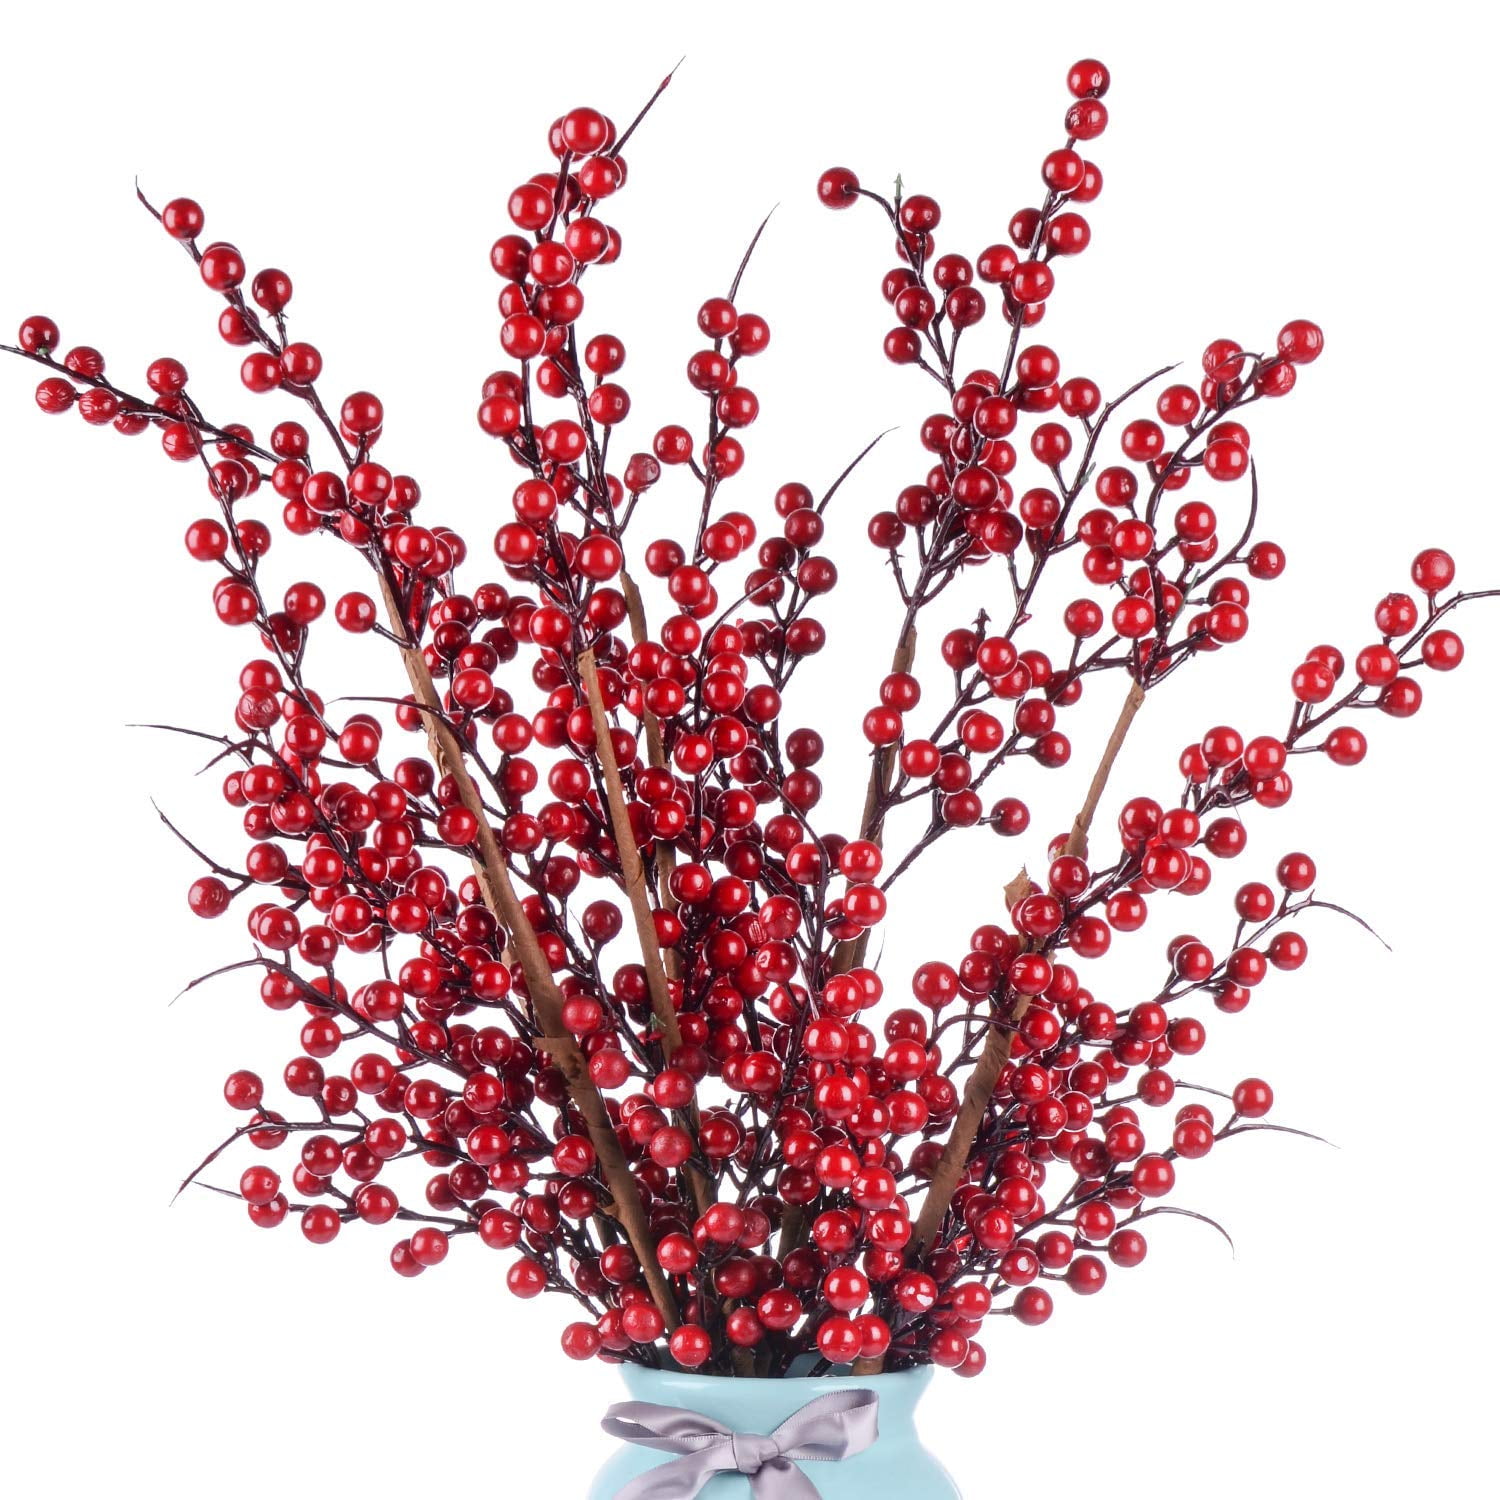 20 Pack 8inch Artificial Christmas Red Berries Stems for Christmas Tree Orn C7Y8 